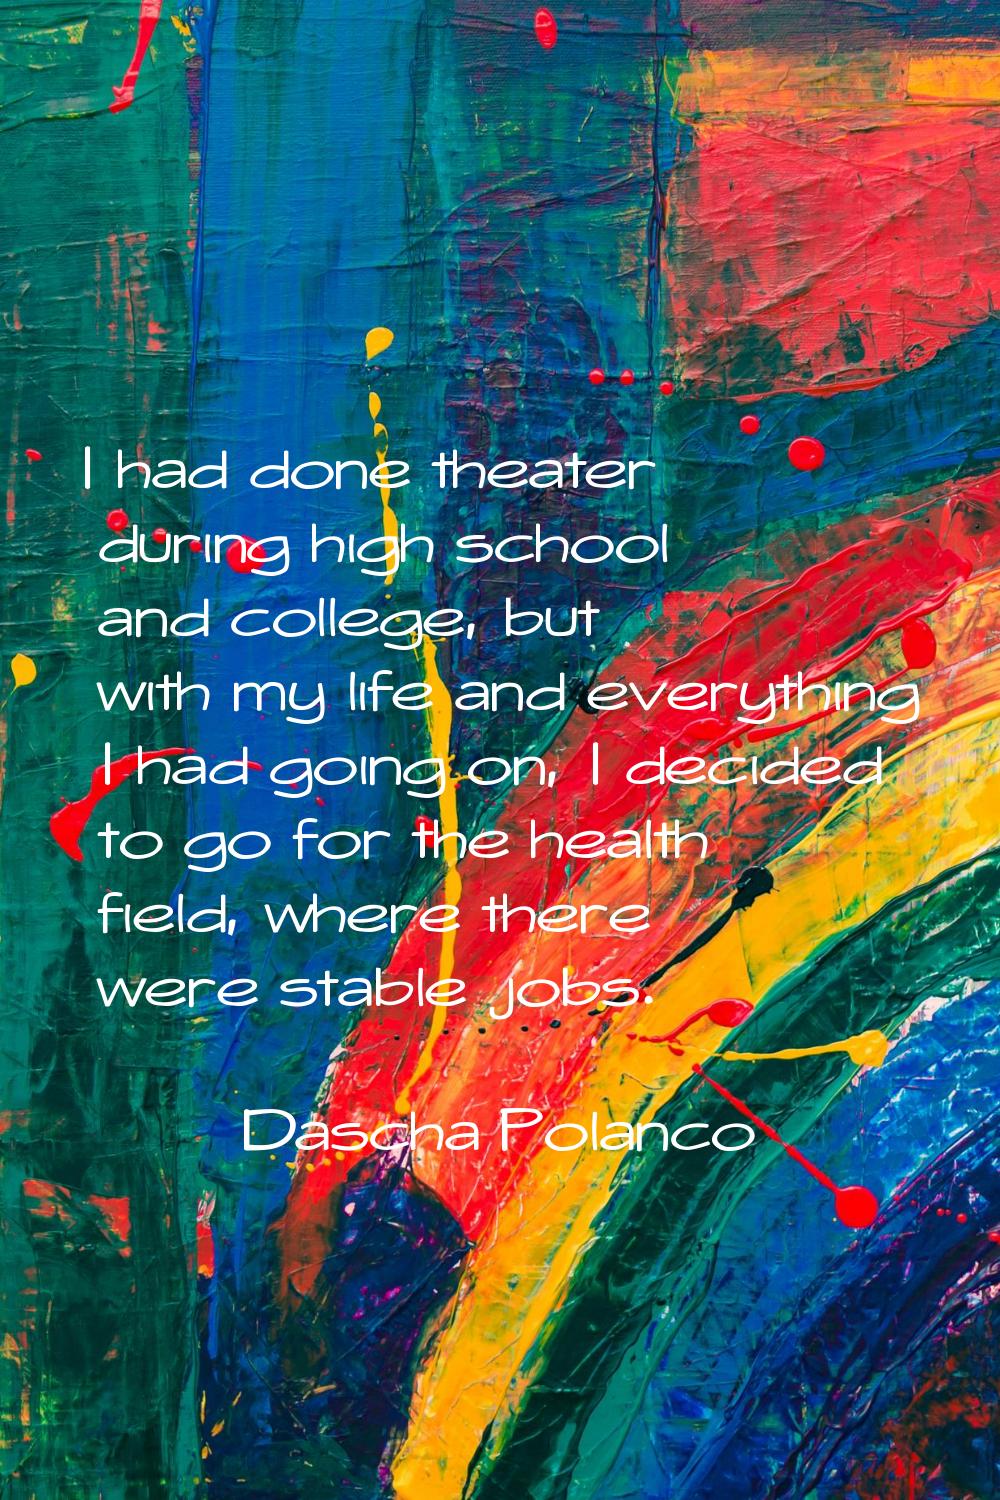 I had done theater during high school and college, but with my life and everything I had going on, 